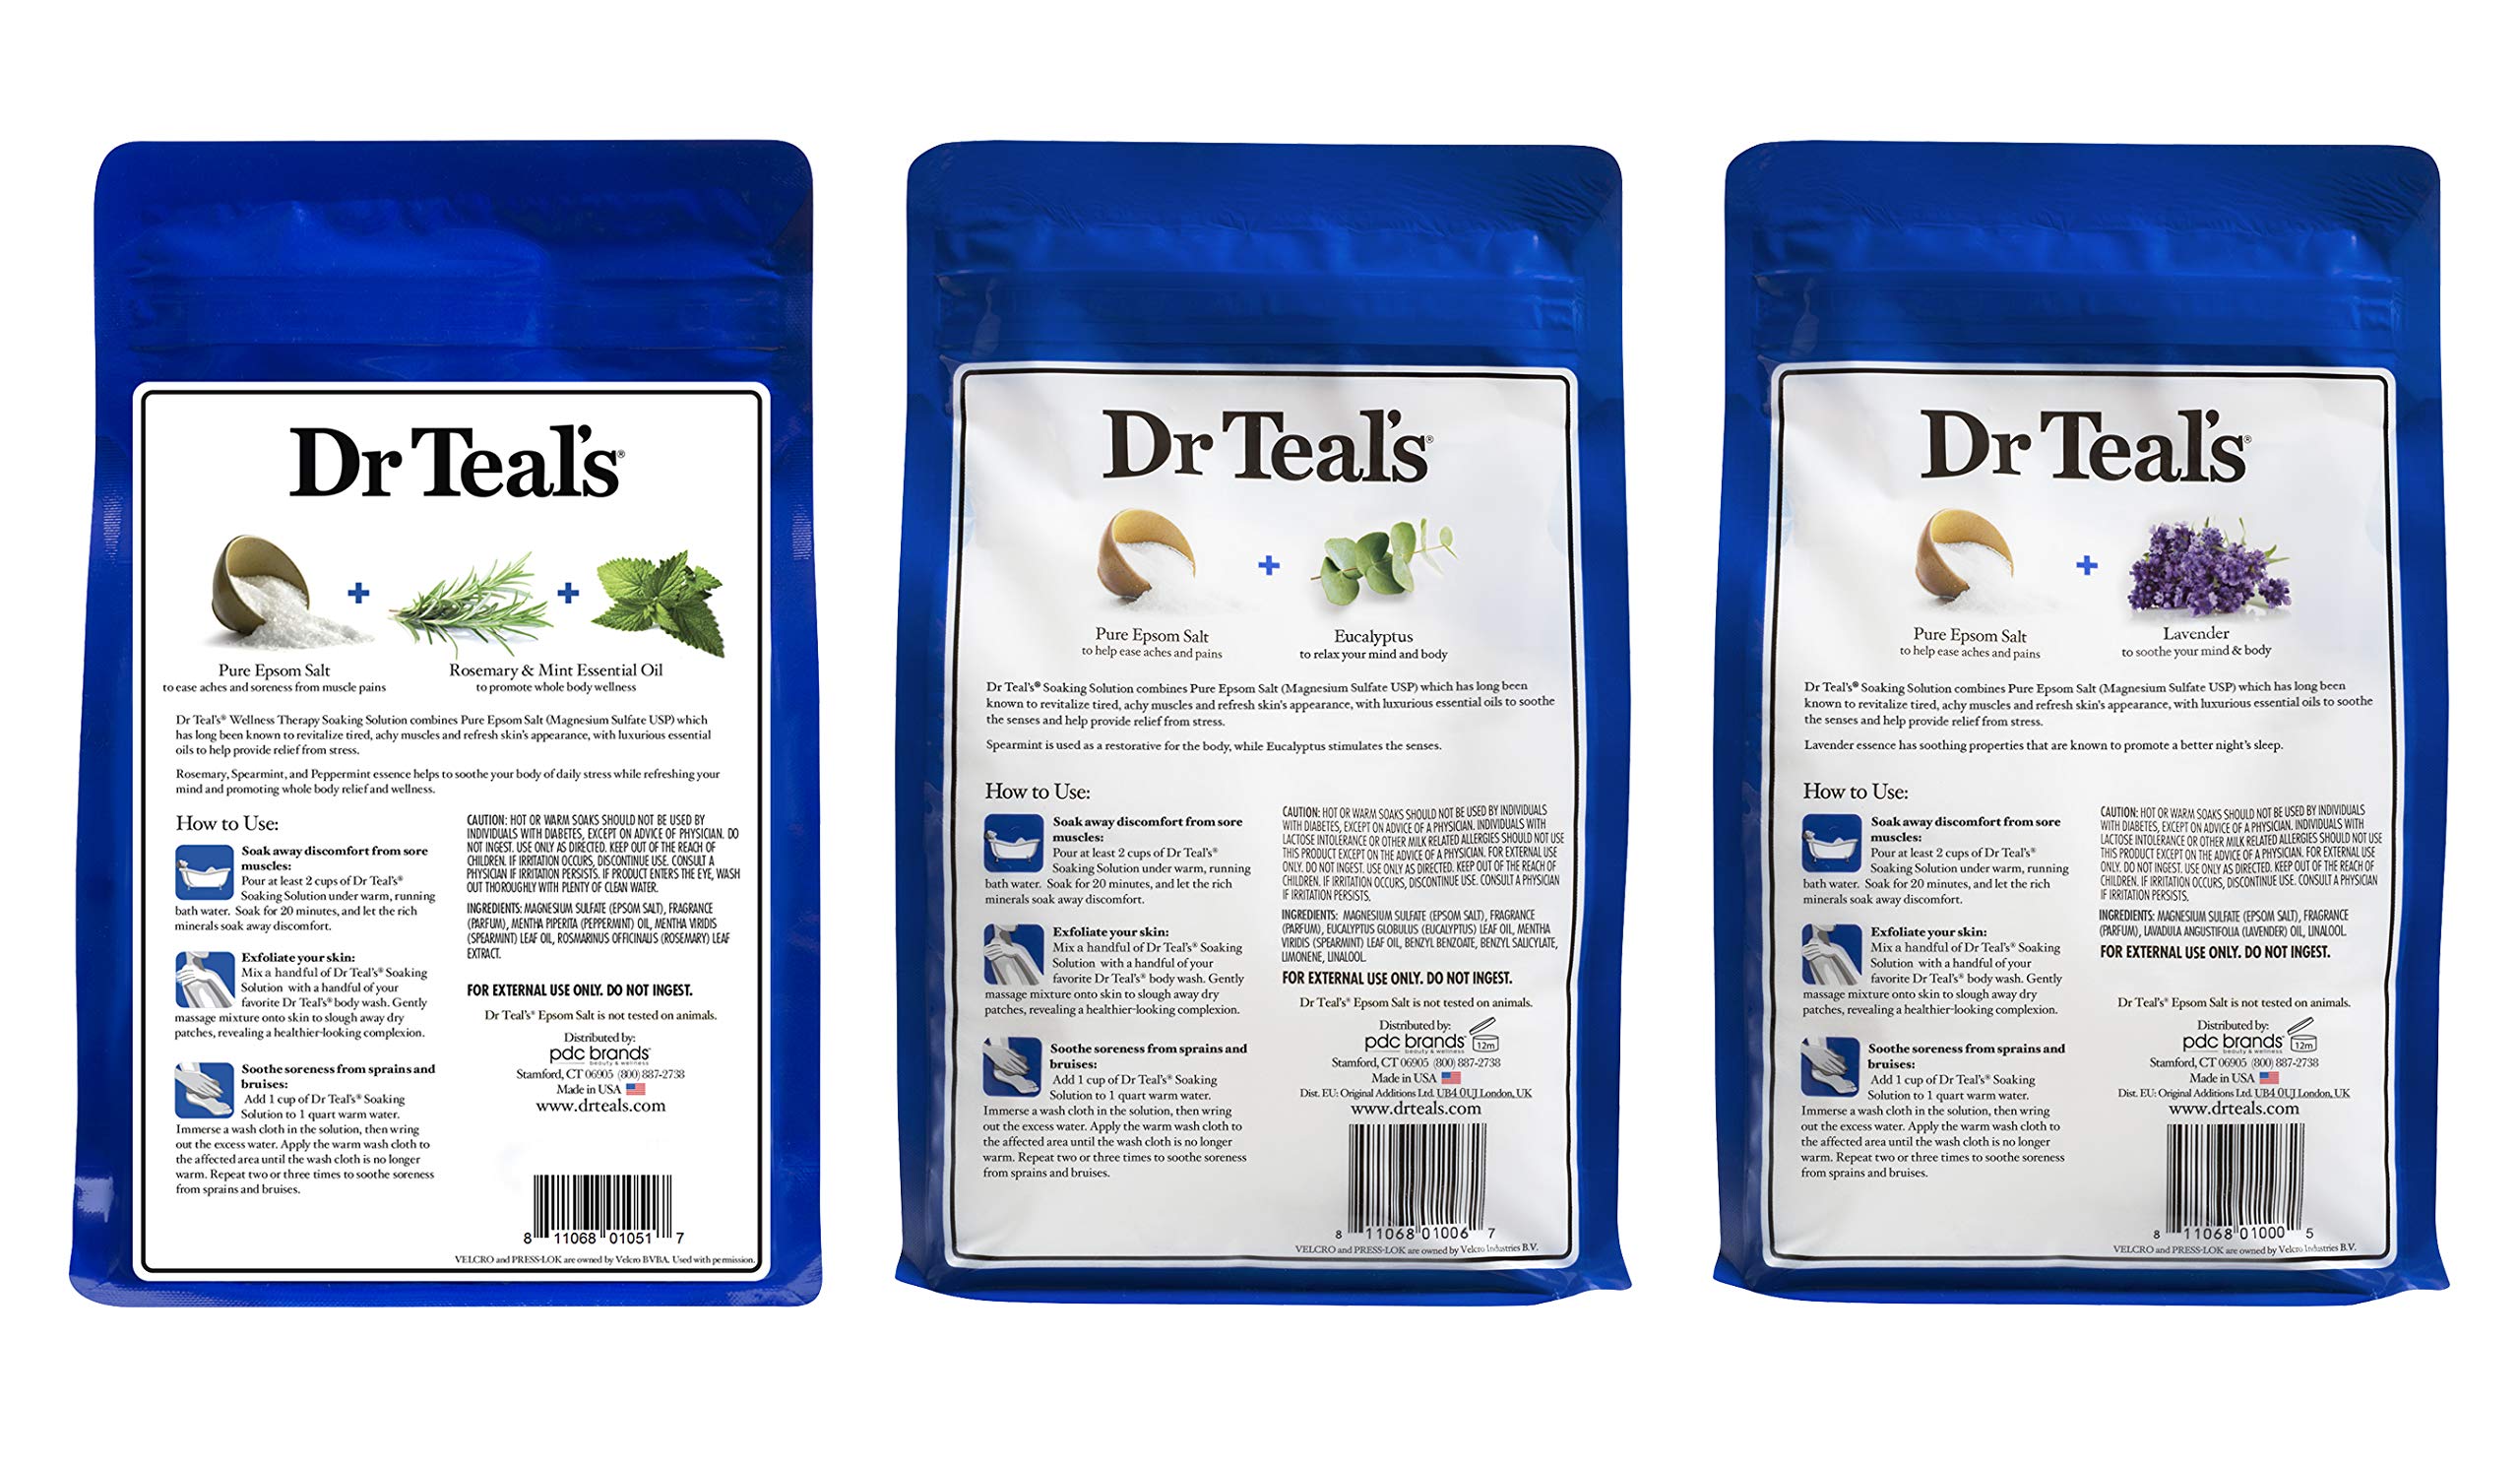 Dr. Teal's Epsom Salt Bundle, 3 Items: 1 Relax & Relief Eucalyptus Spearmint, 1 Sooth & Sleep Lavender and 1 Therapy & Relief Rosemary and Mint, 48 Ounce each, 1 Set